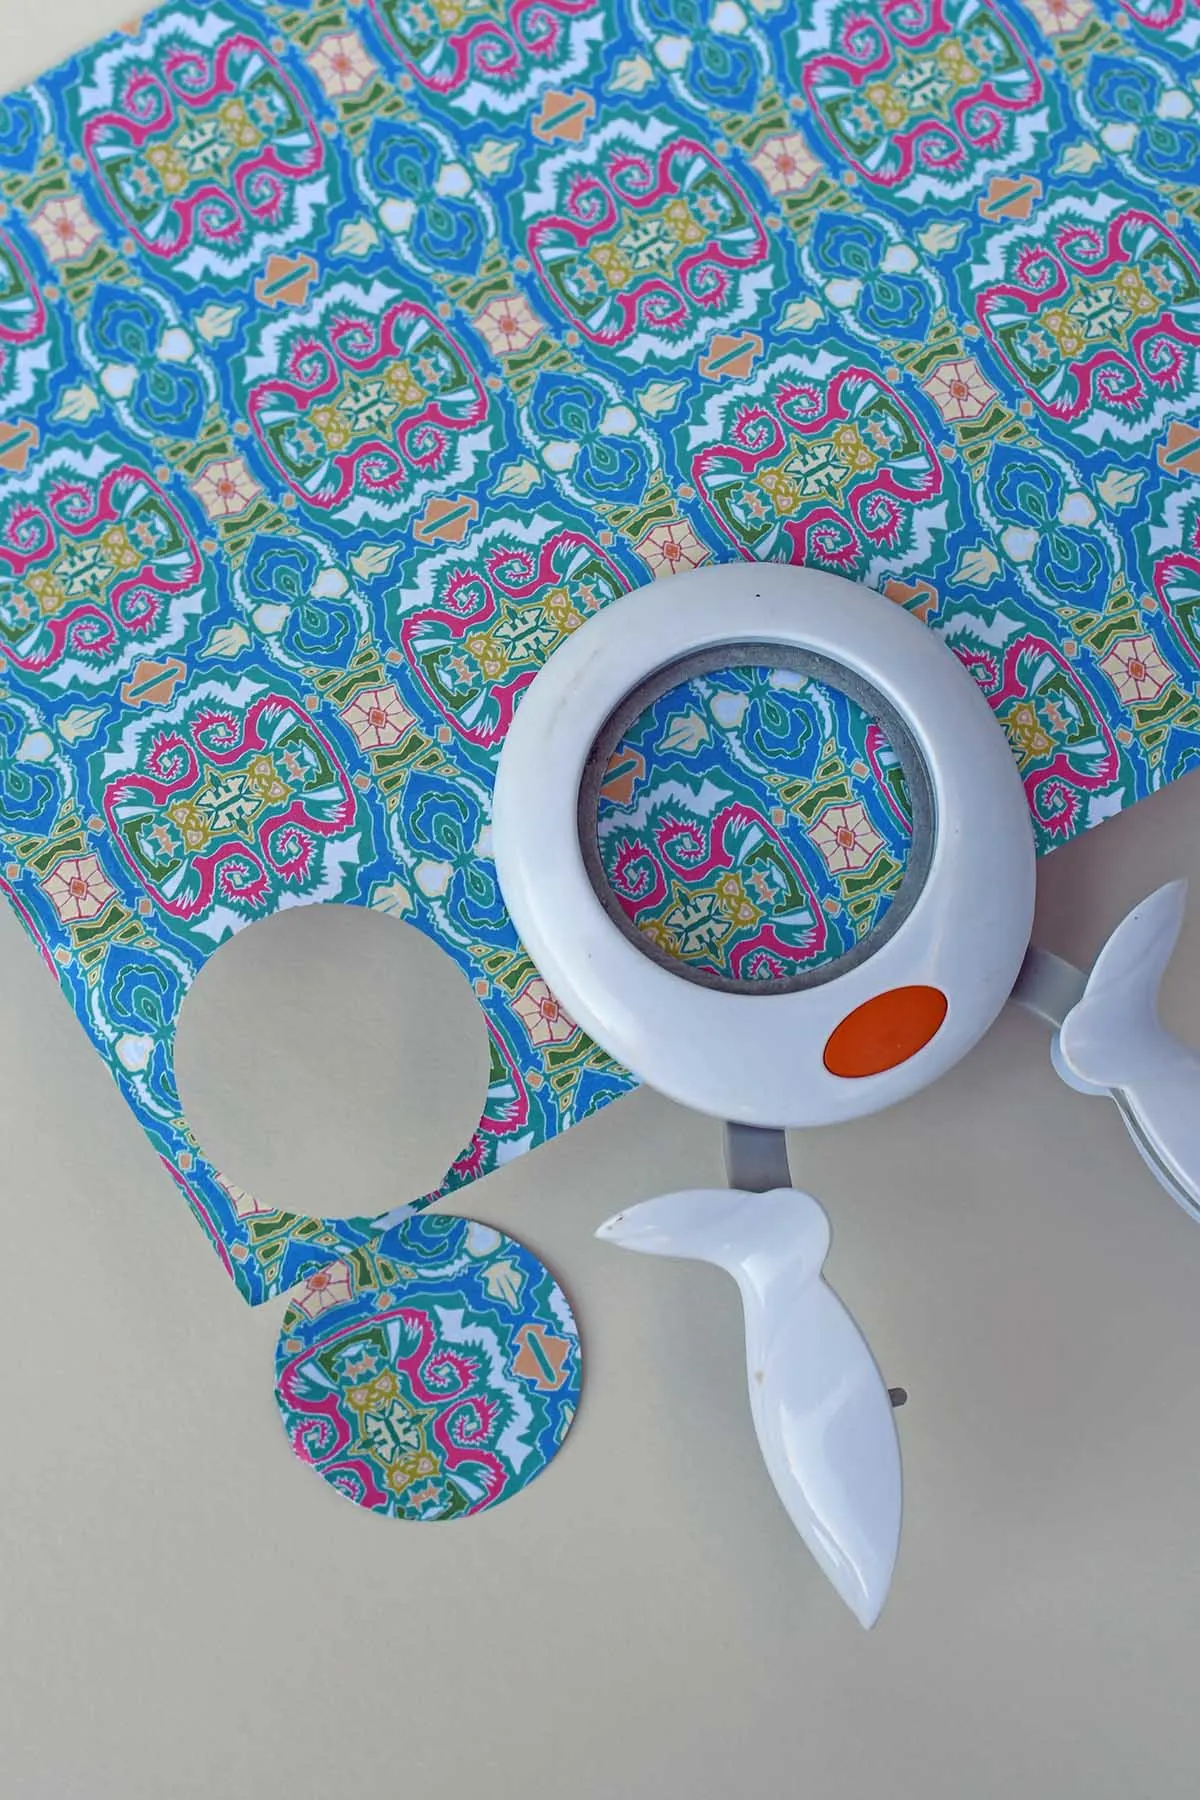 Punching out circles from the decorative paper